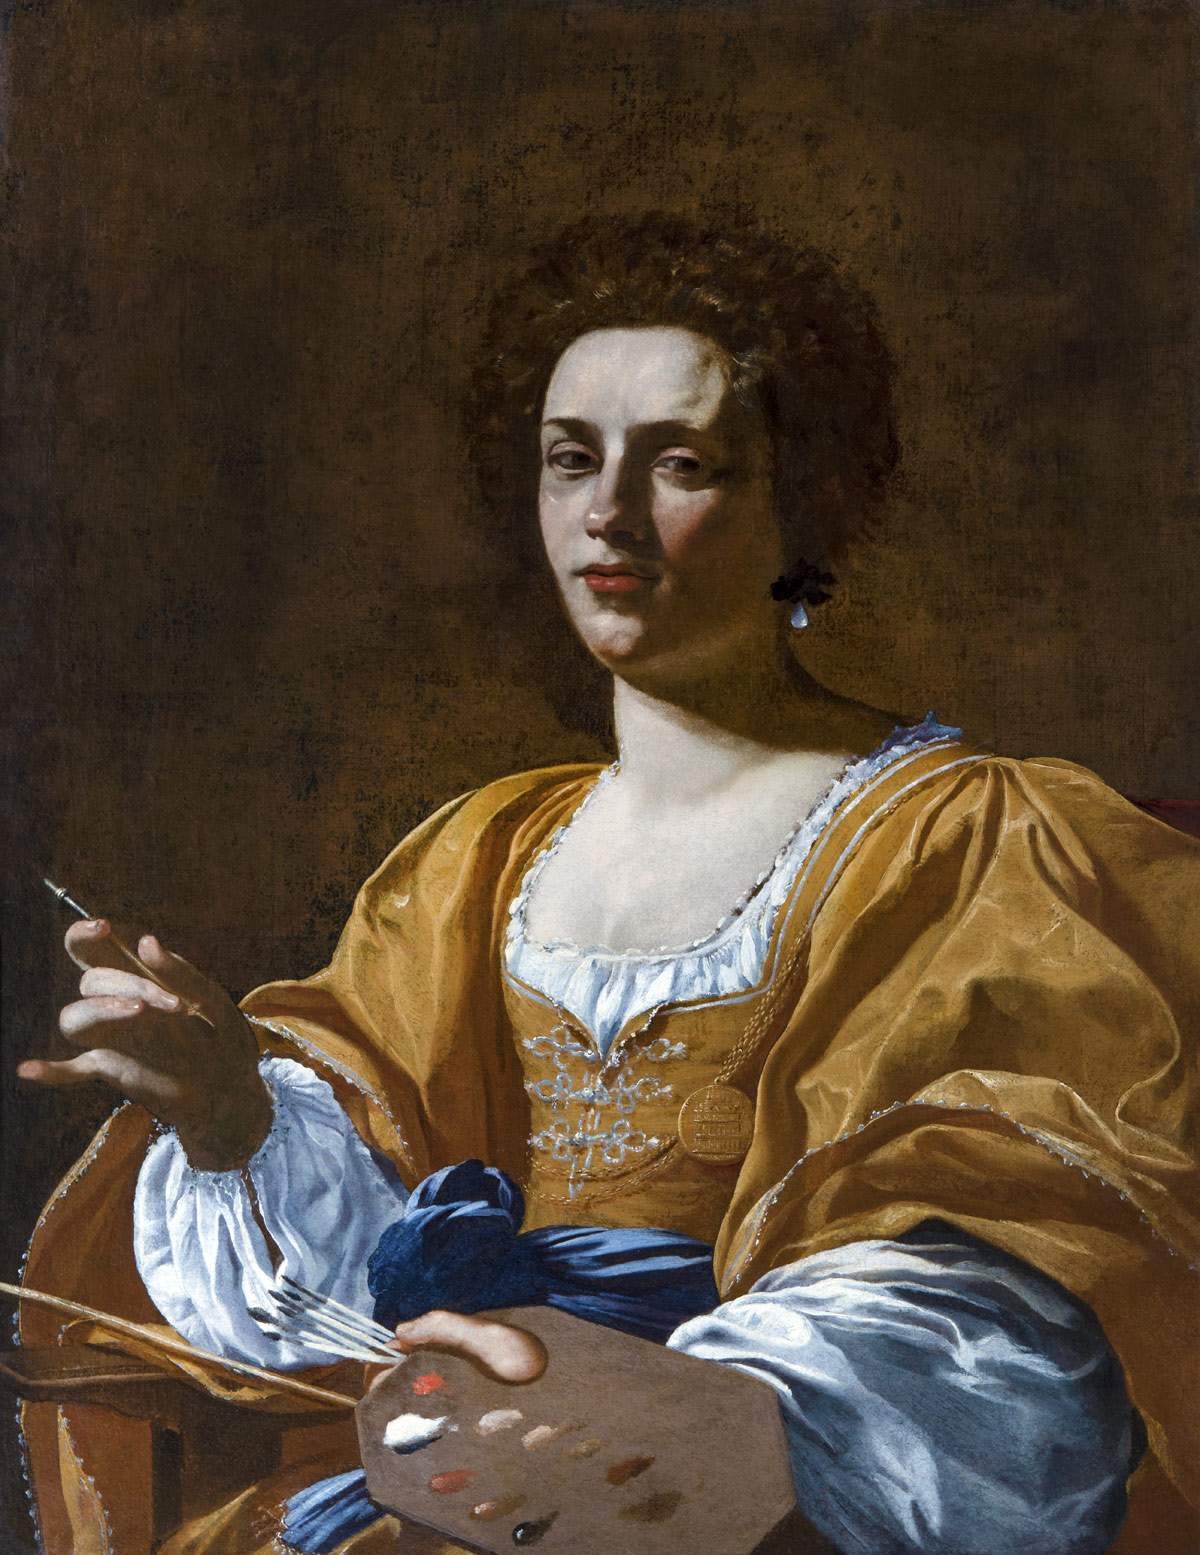 Pisa is enriched with a valuable portrait of Artemisia Gentileschi, created by Simon Vouet: the work purchased for Palazzo Blu